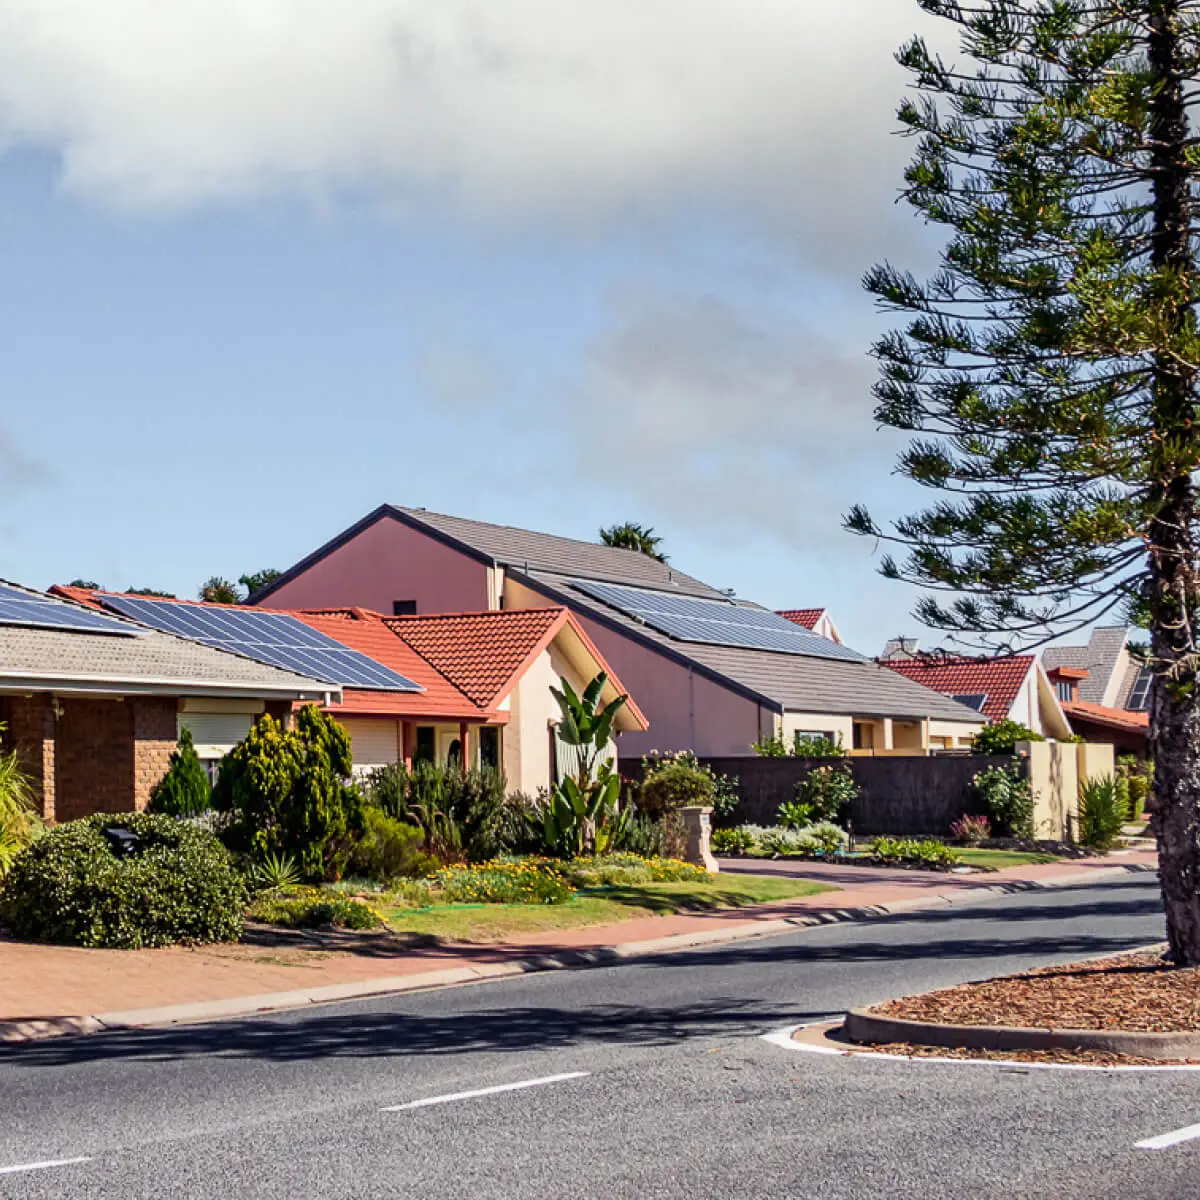 Row of typical Aussie homes, all have solar installed on their different rooftops. Tall pine trees line the footpath opposite the row of houses.